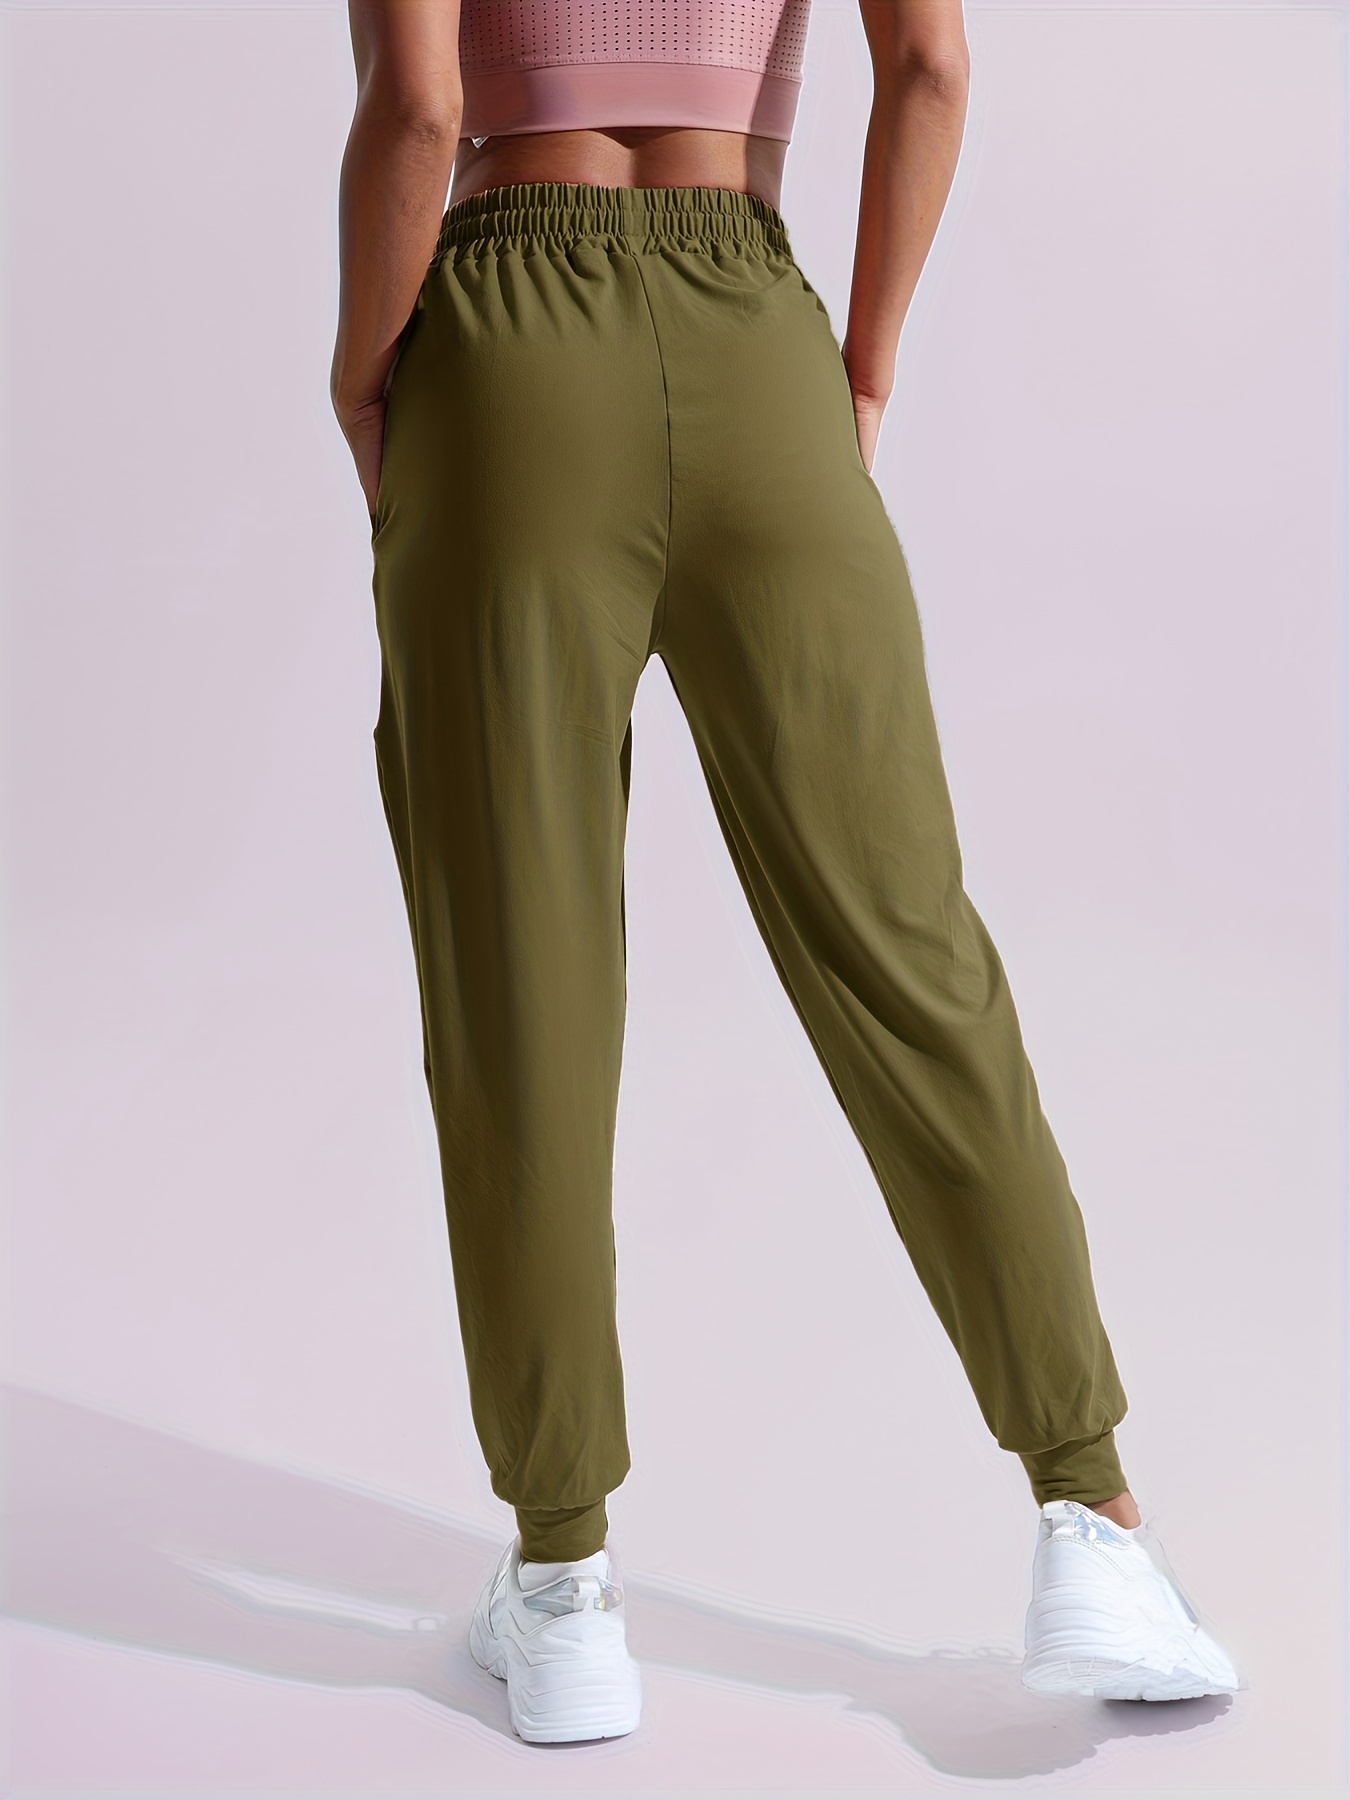 Casual Solid Ruched Pants, Casual High Waist Elastic Baggy Pants With  Pockets, Women's Clothing